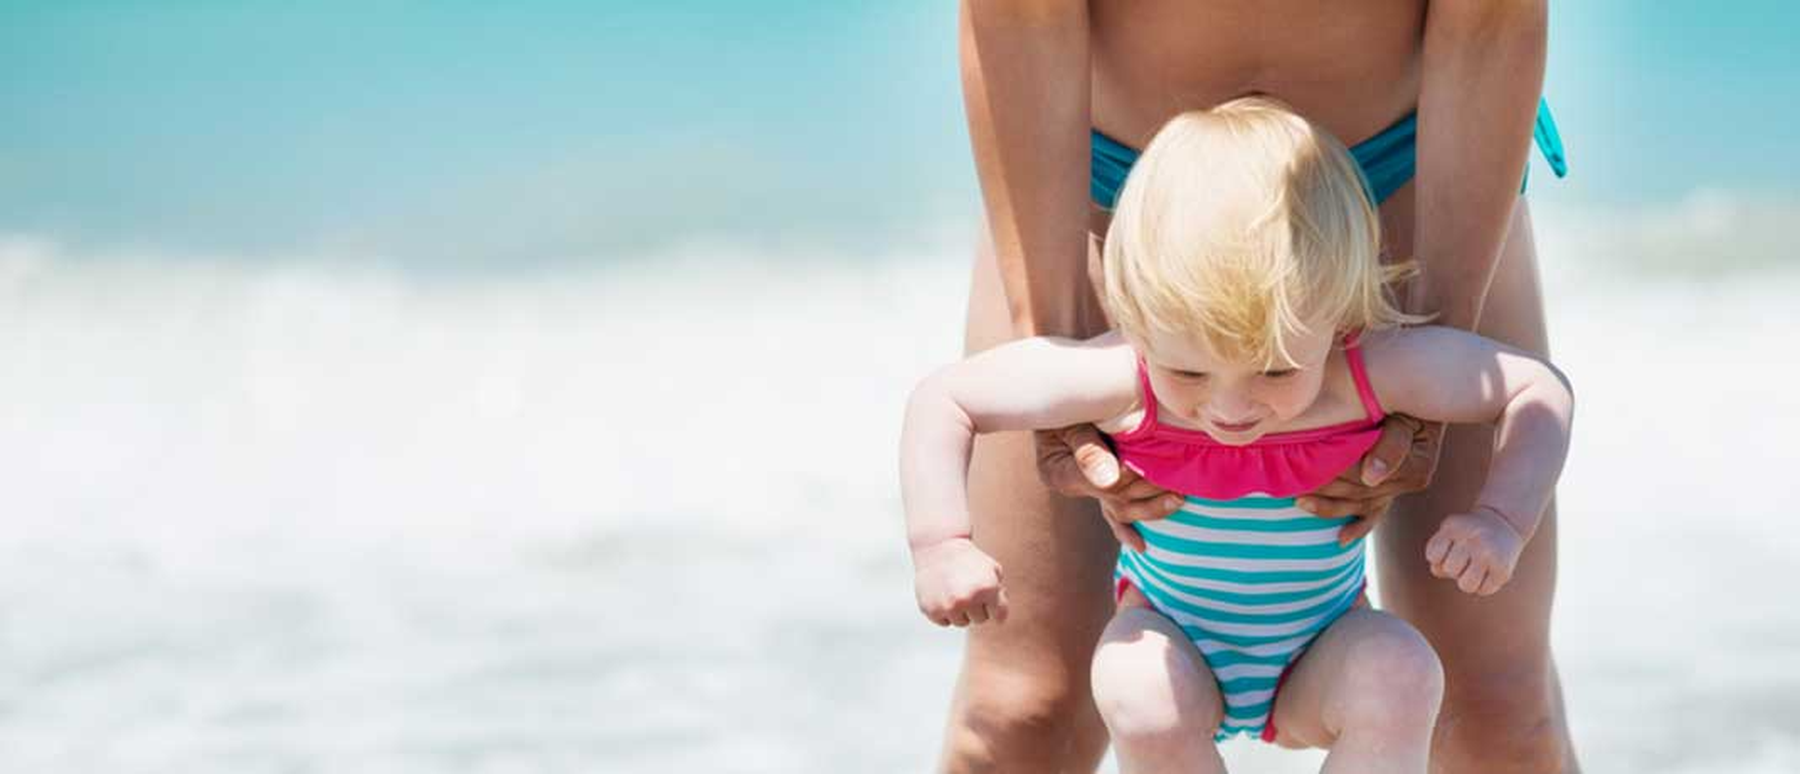 A Summer of Savings: Best Kid’s and Baby Sales